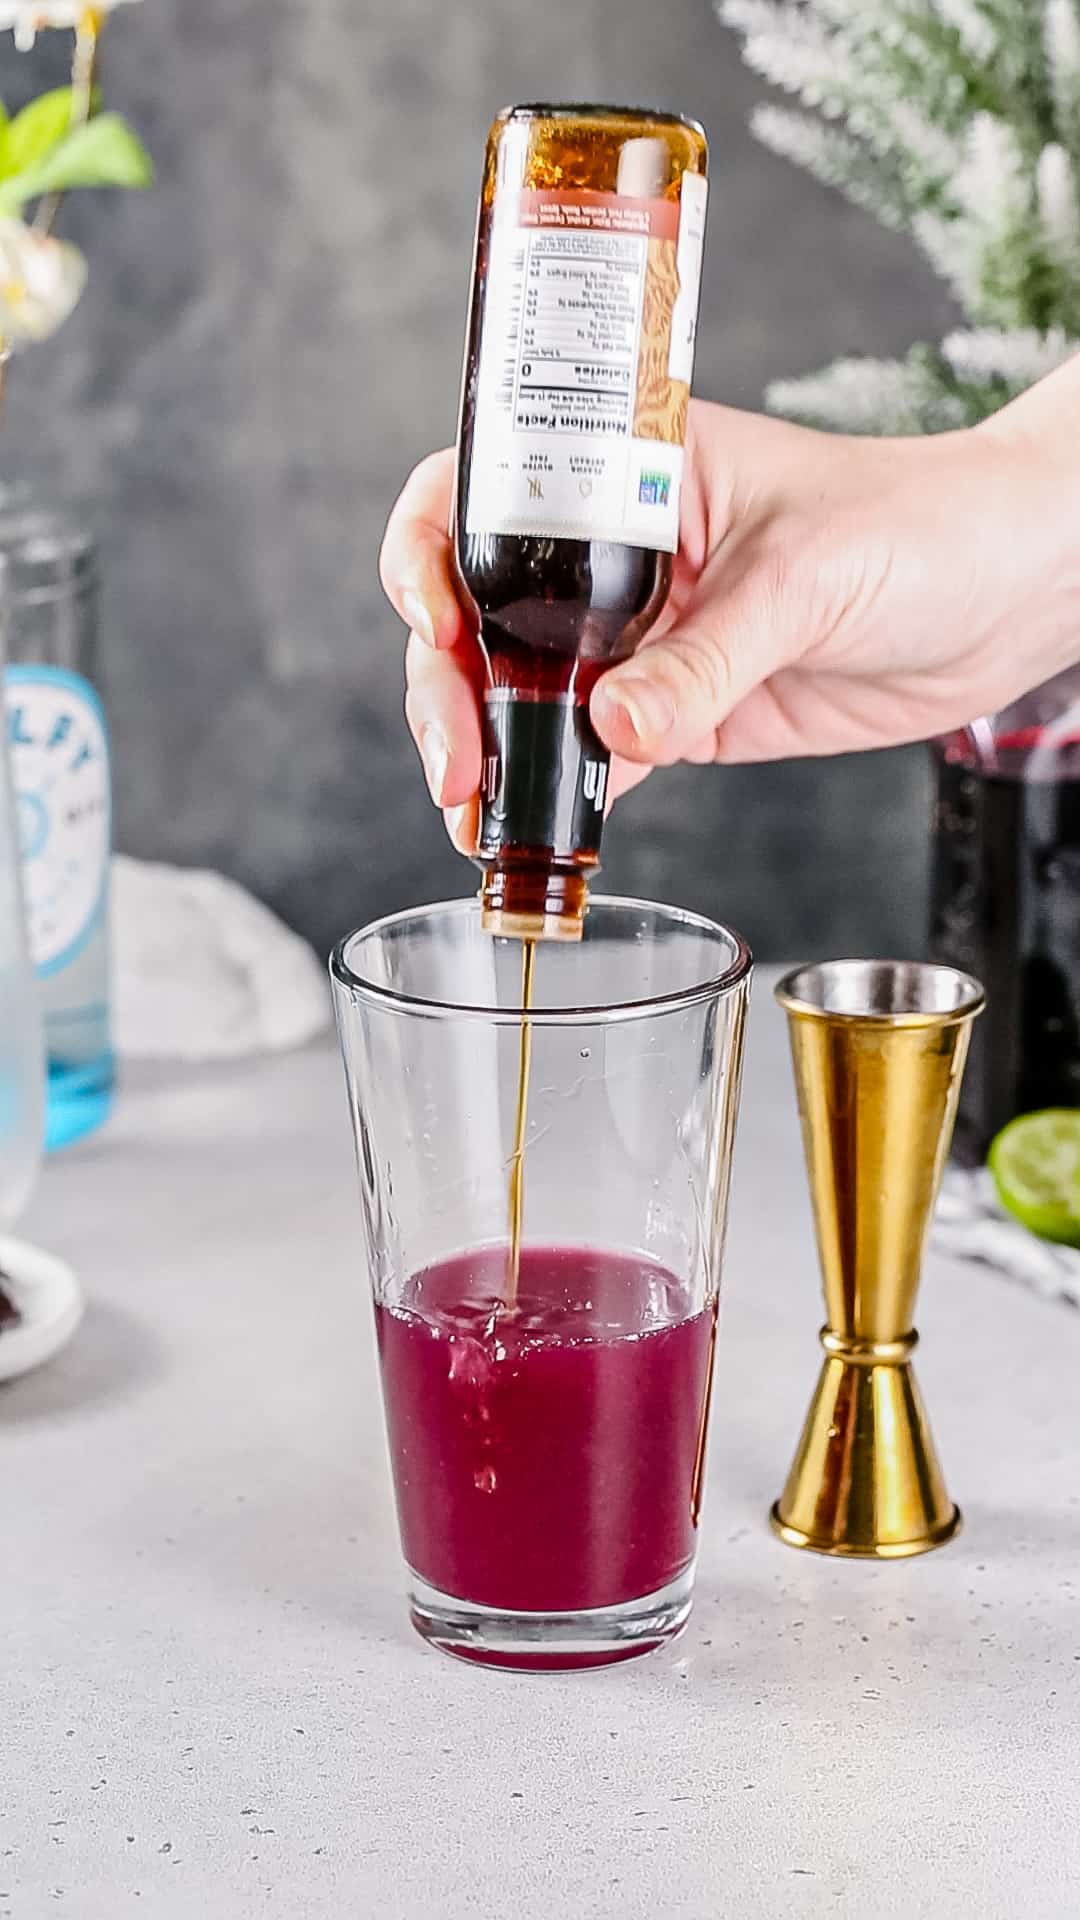 Adding ginger bitters to a cocktail shaker filled with dark pink liquid.